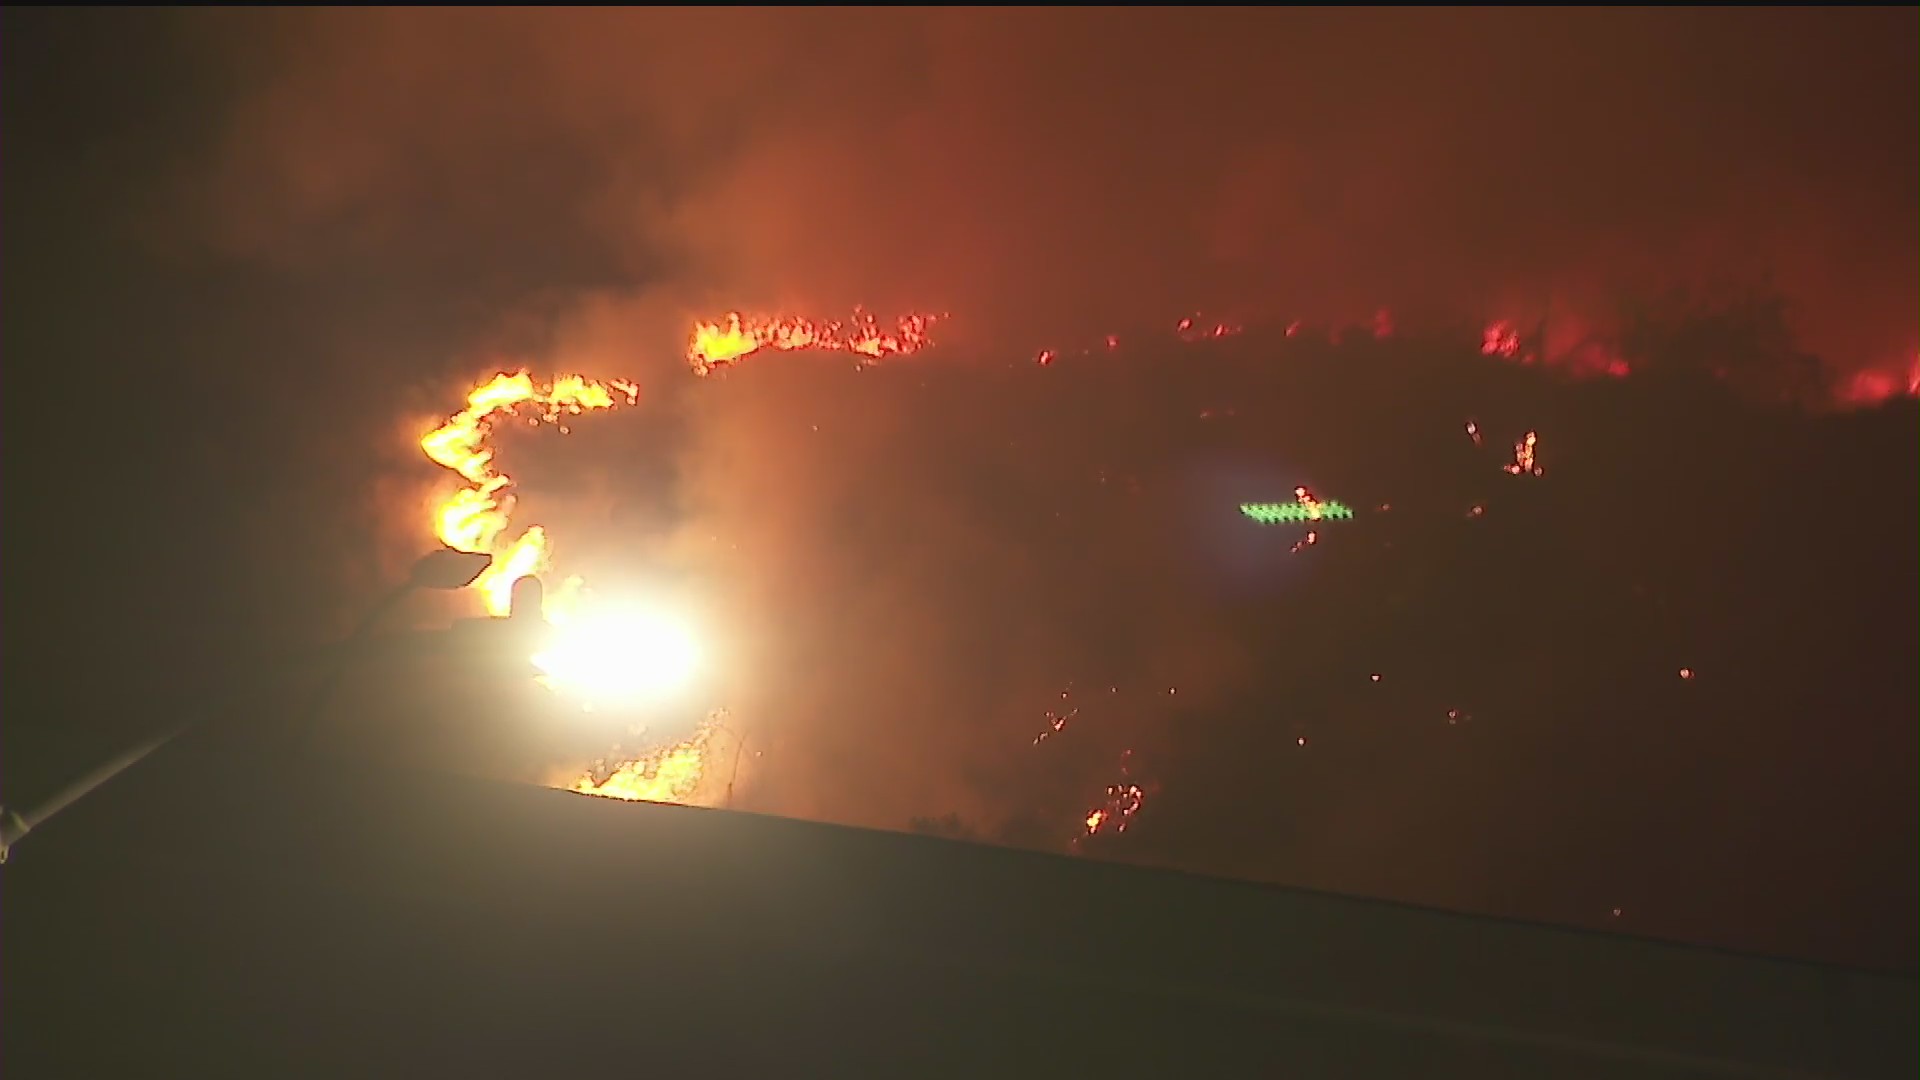 Firefighters respond to a brush fire in the Bel-Air area on June 10, 2020. (KTLA)